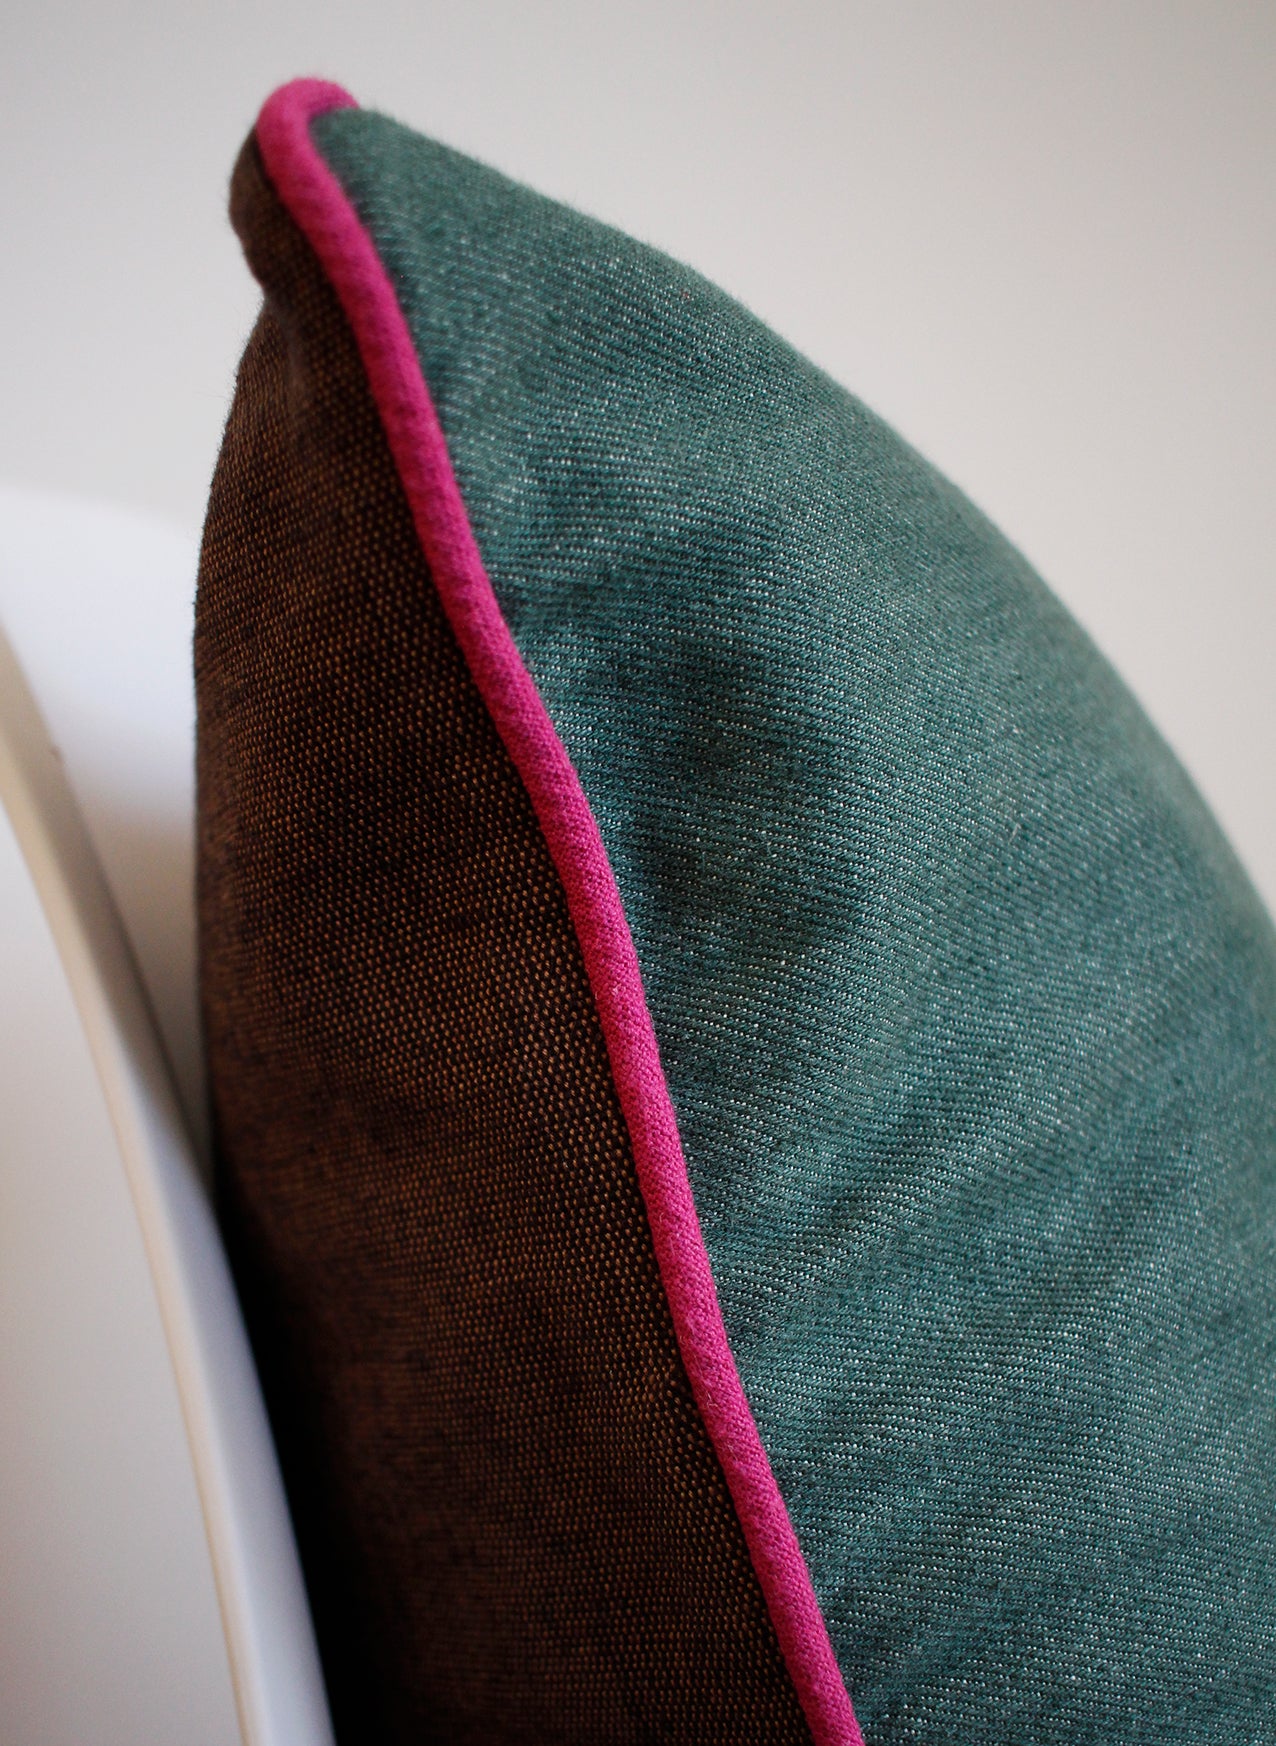 Detail of green denim cushion with pink piping